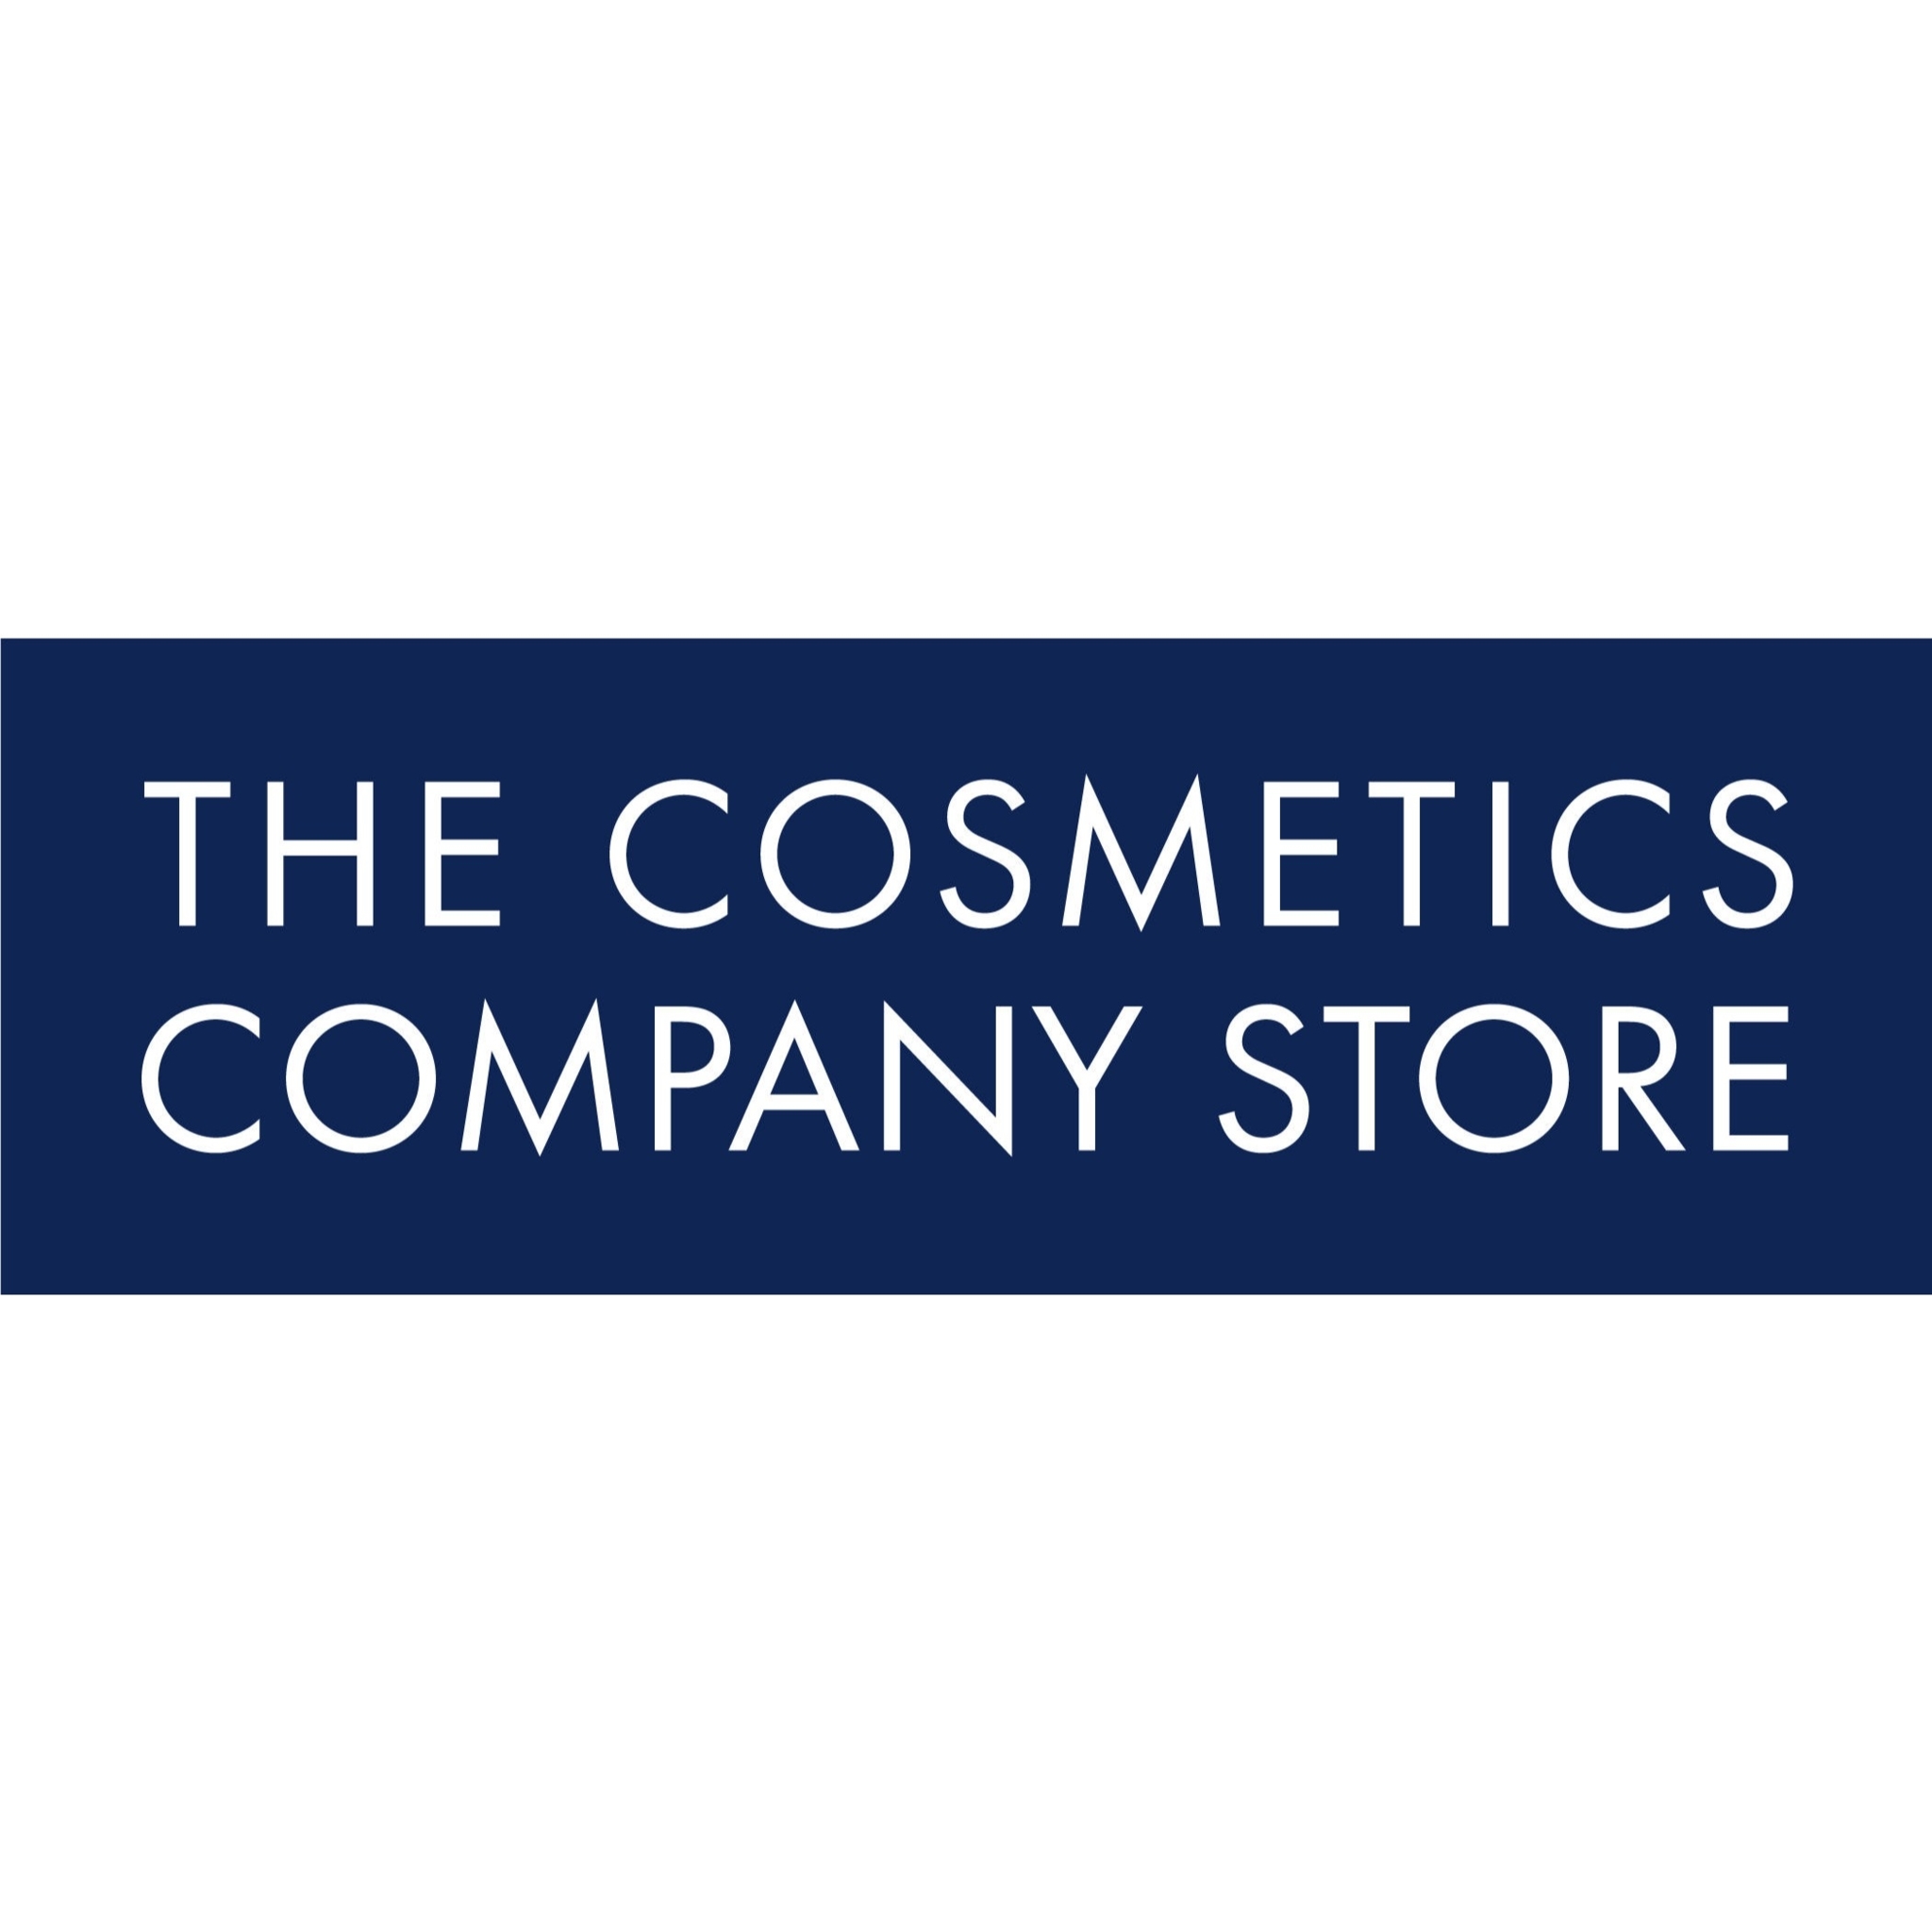 The Company Store - Cosmetics & Perfumes Stores